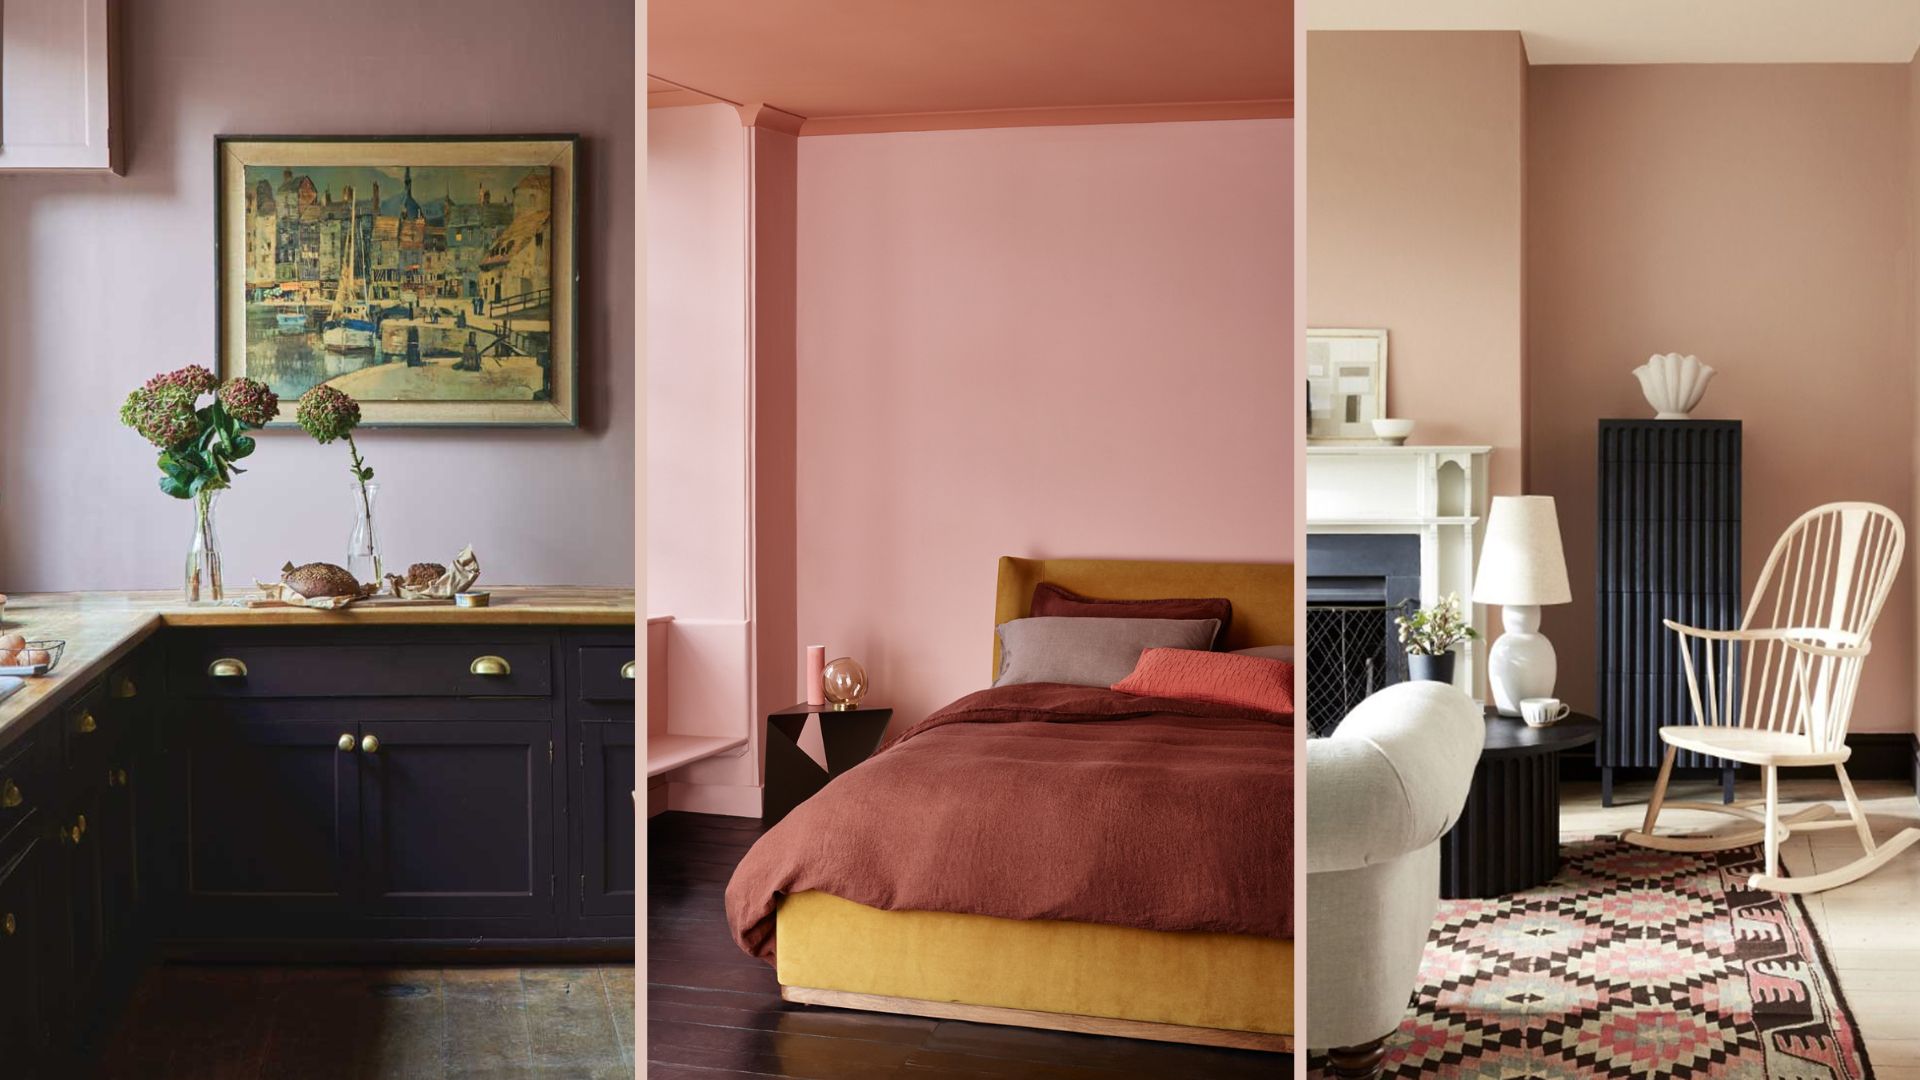 Ten pink interiors that range from rose blush to bright coral